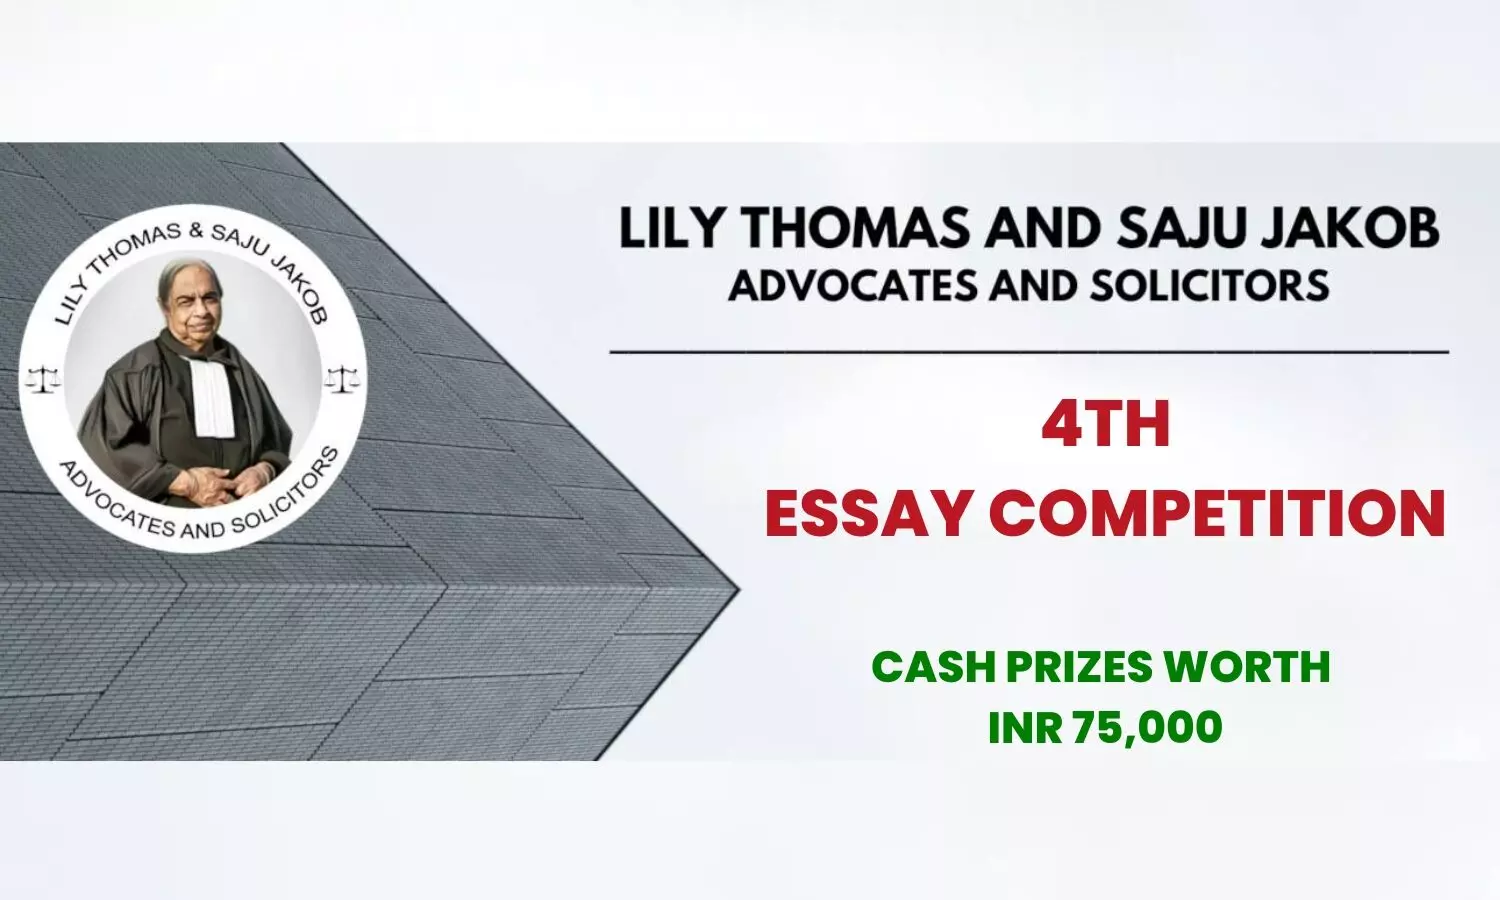 4th Essay Competition | Office of Lily Thomas & Saju Jakob